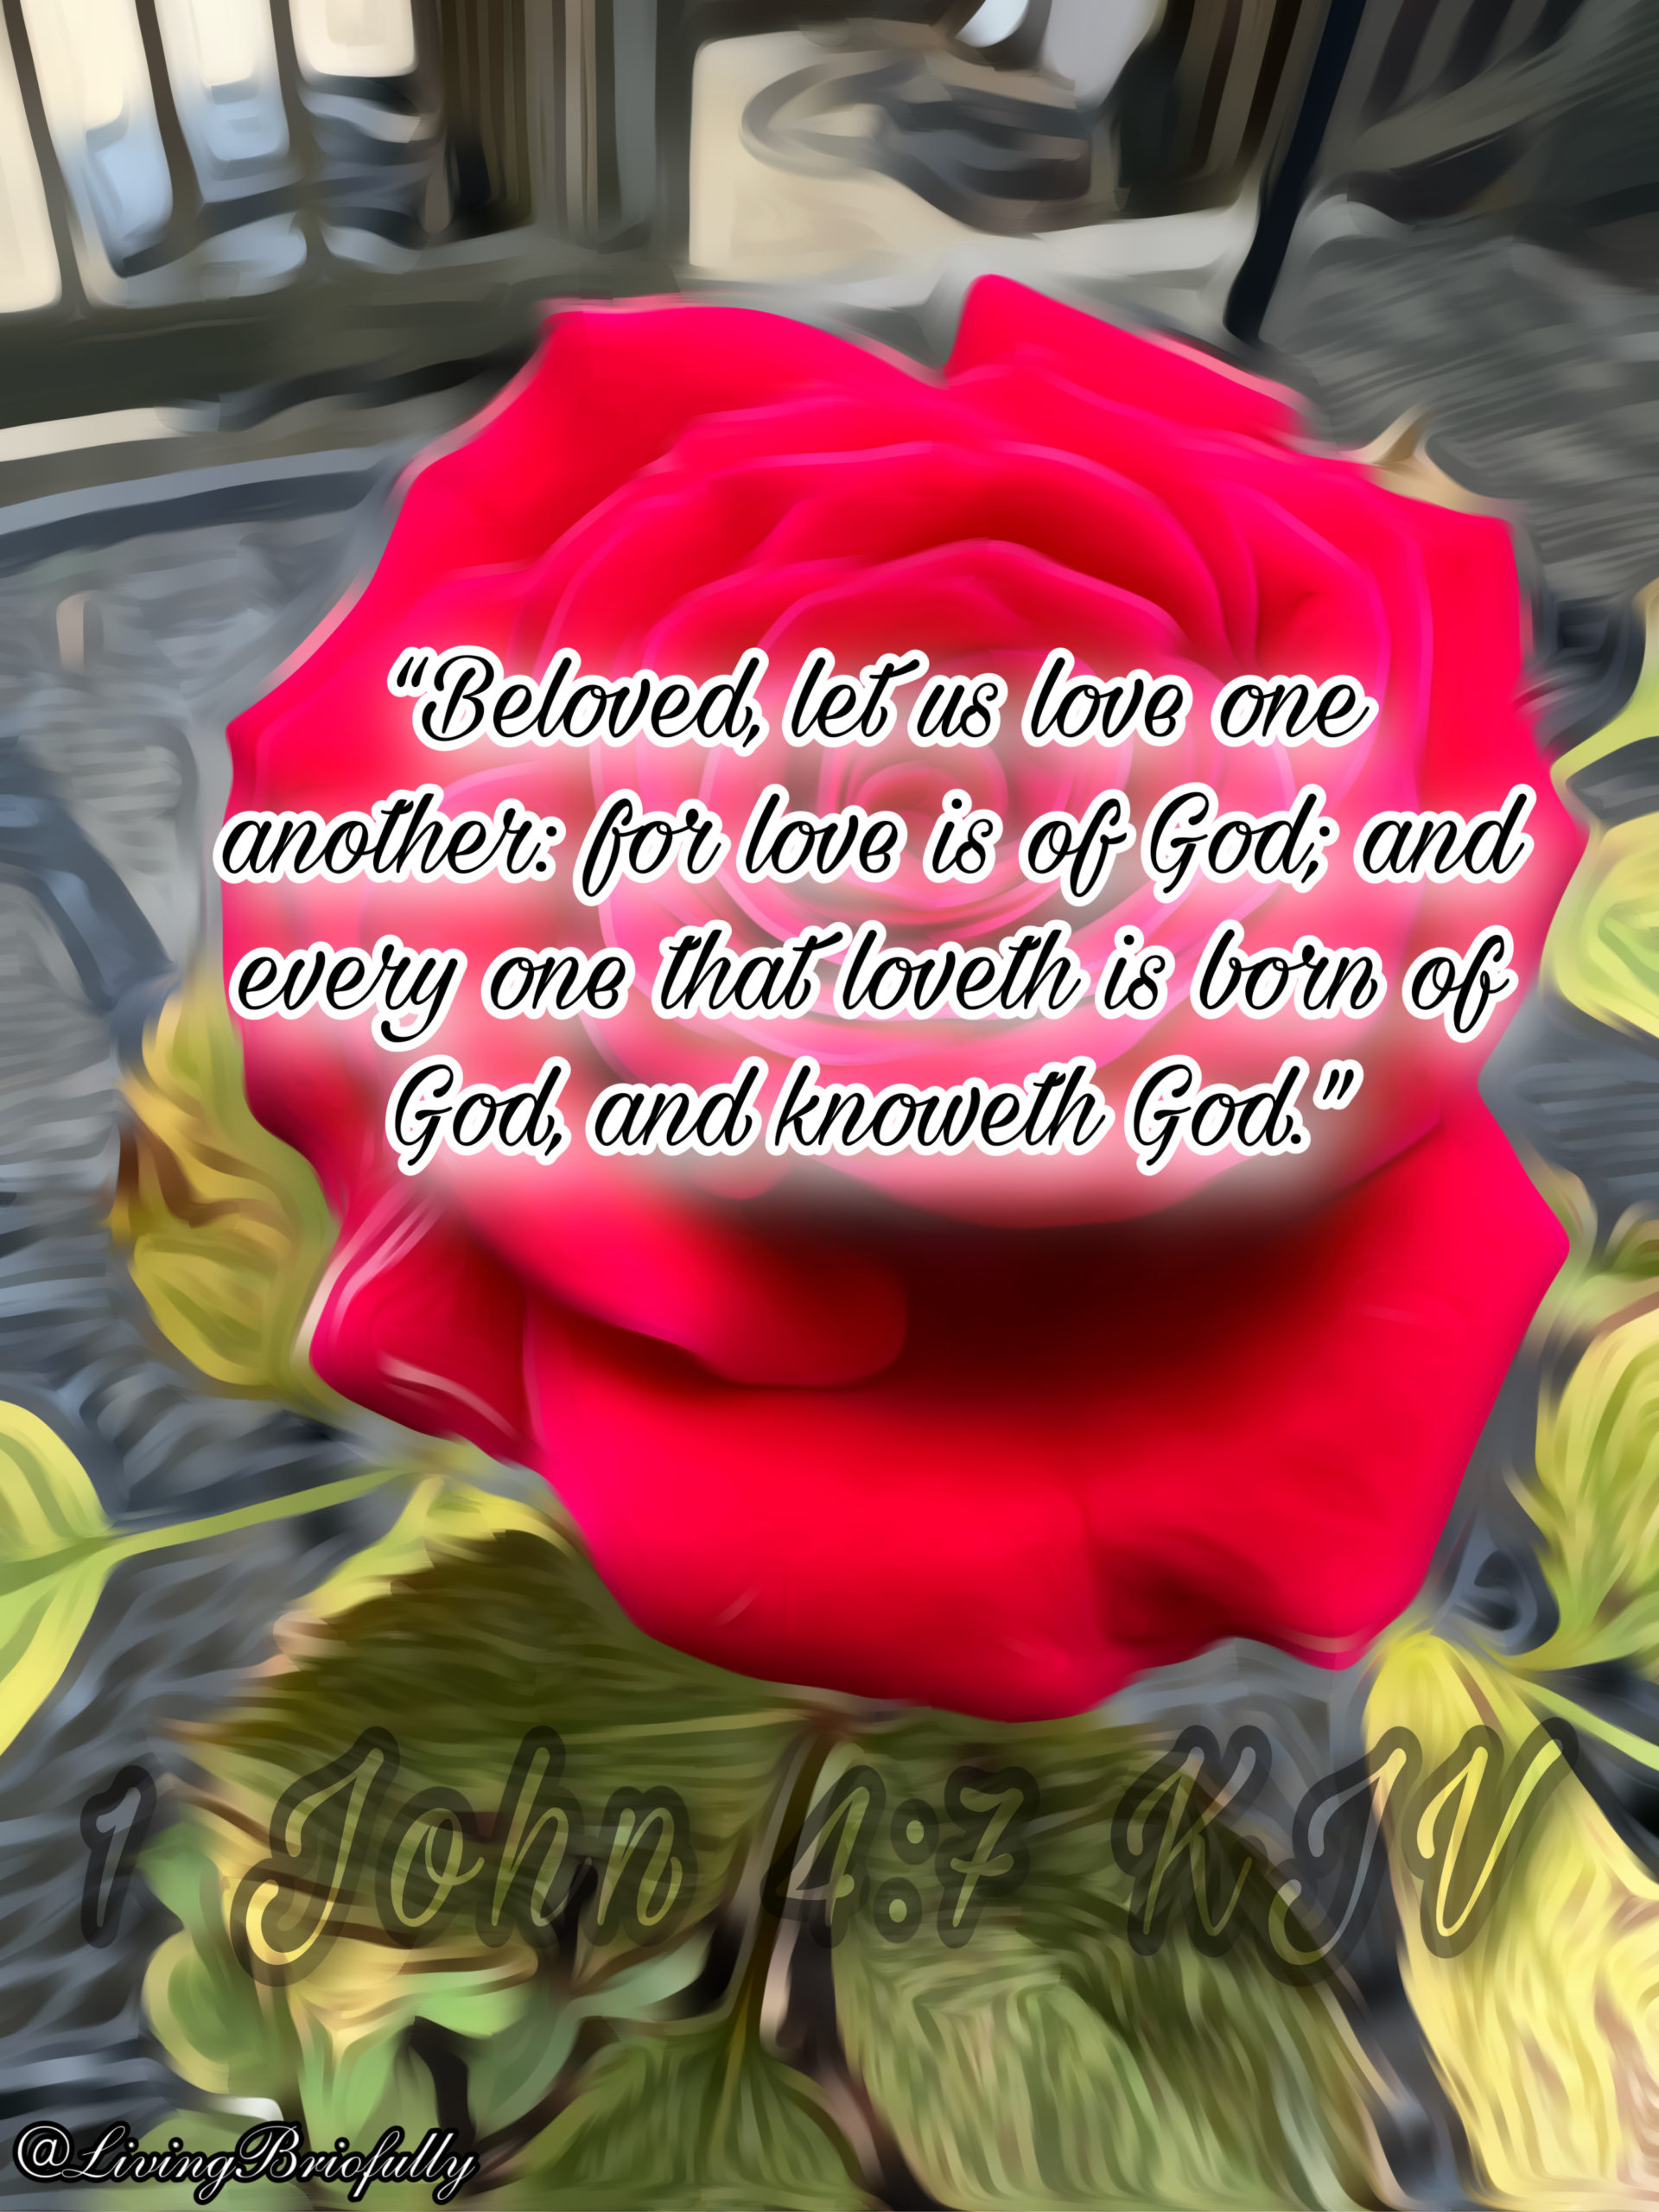 "Beloved, let us love one another: for love is of God; and every one that loveth is born of God, and knoweth God." 1 John 4:7